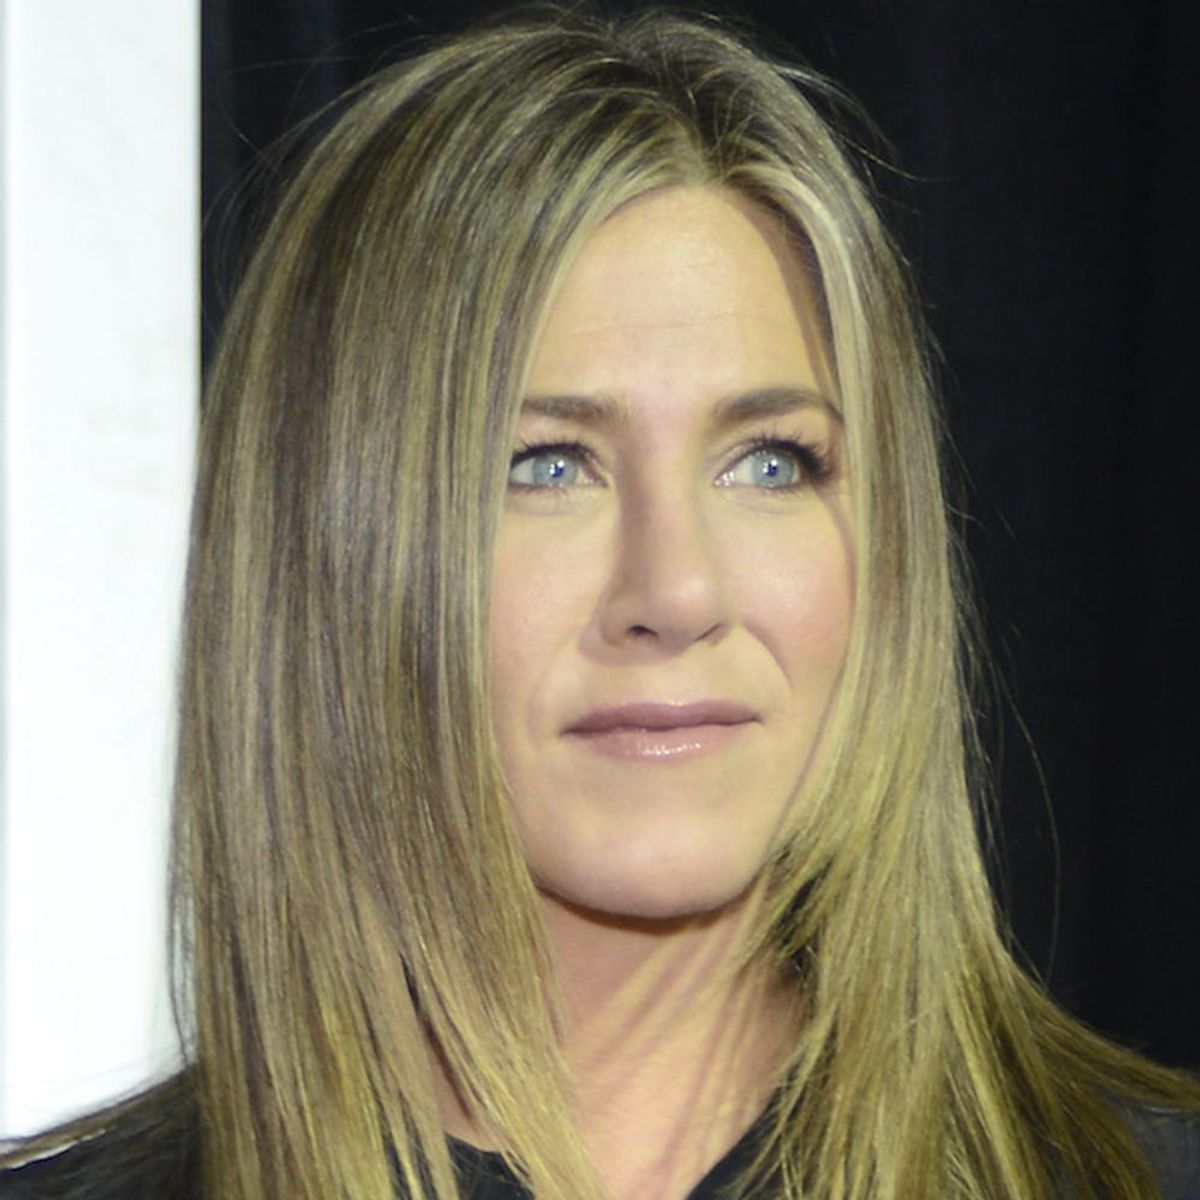 Morning Buzz! Jennifer Aniston Shut Down Pregnancy Rumors and Body Shaming in This Powerful Essay + More